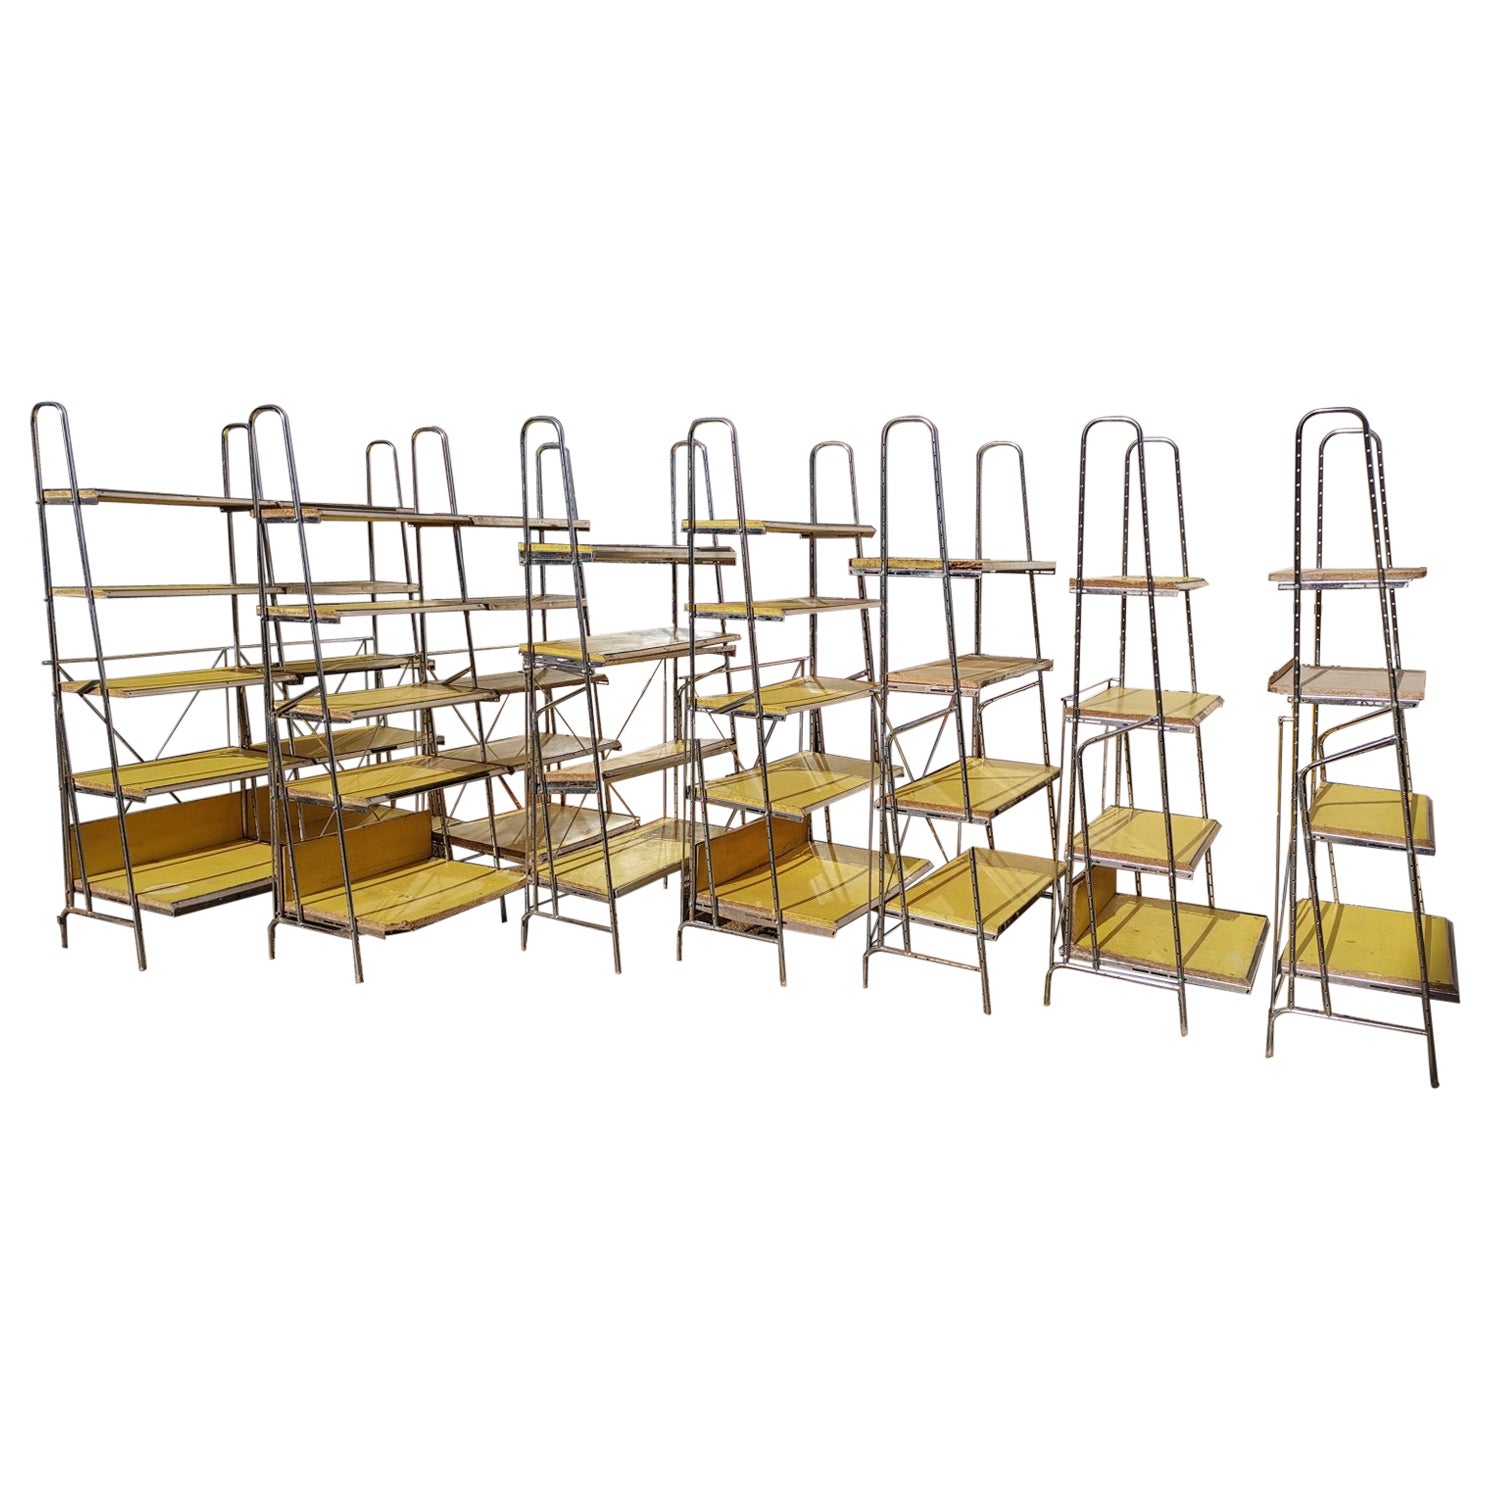 Stylish Midcentury Chrome on Steel Shop Shelving with Braced Back Supports